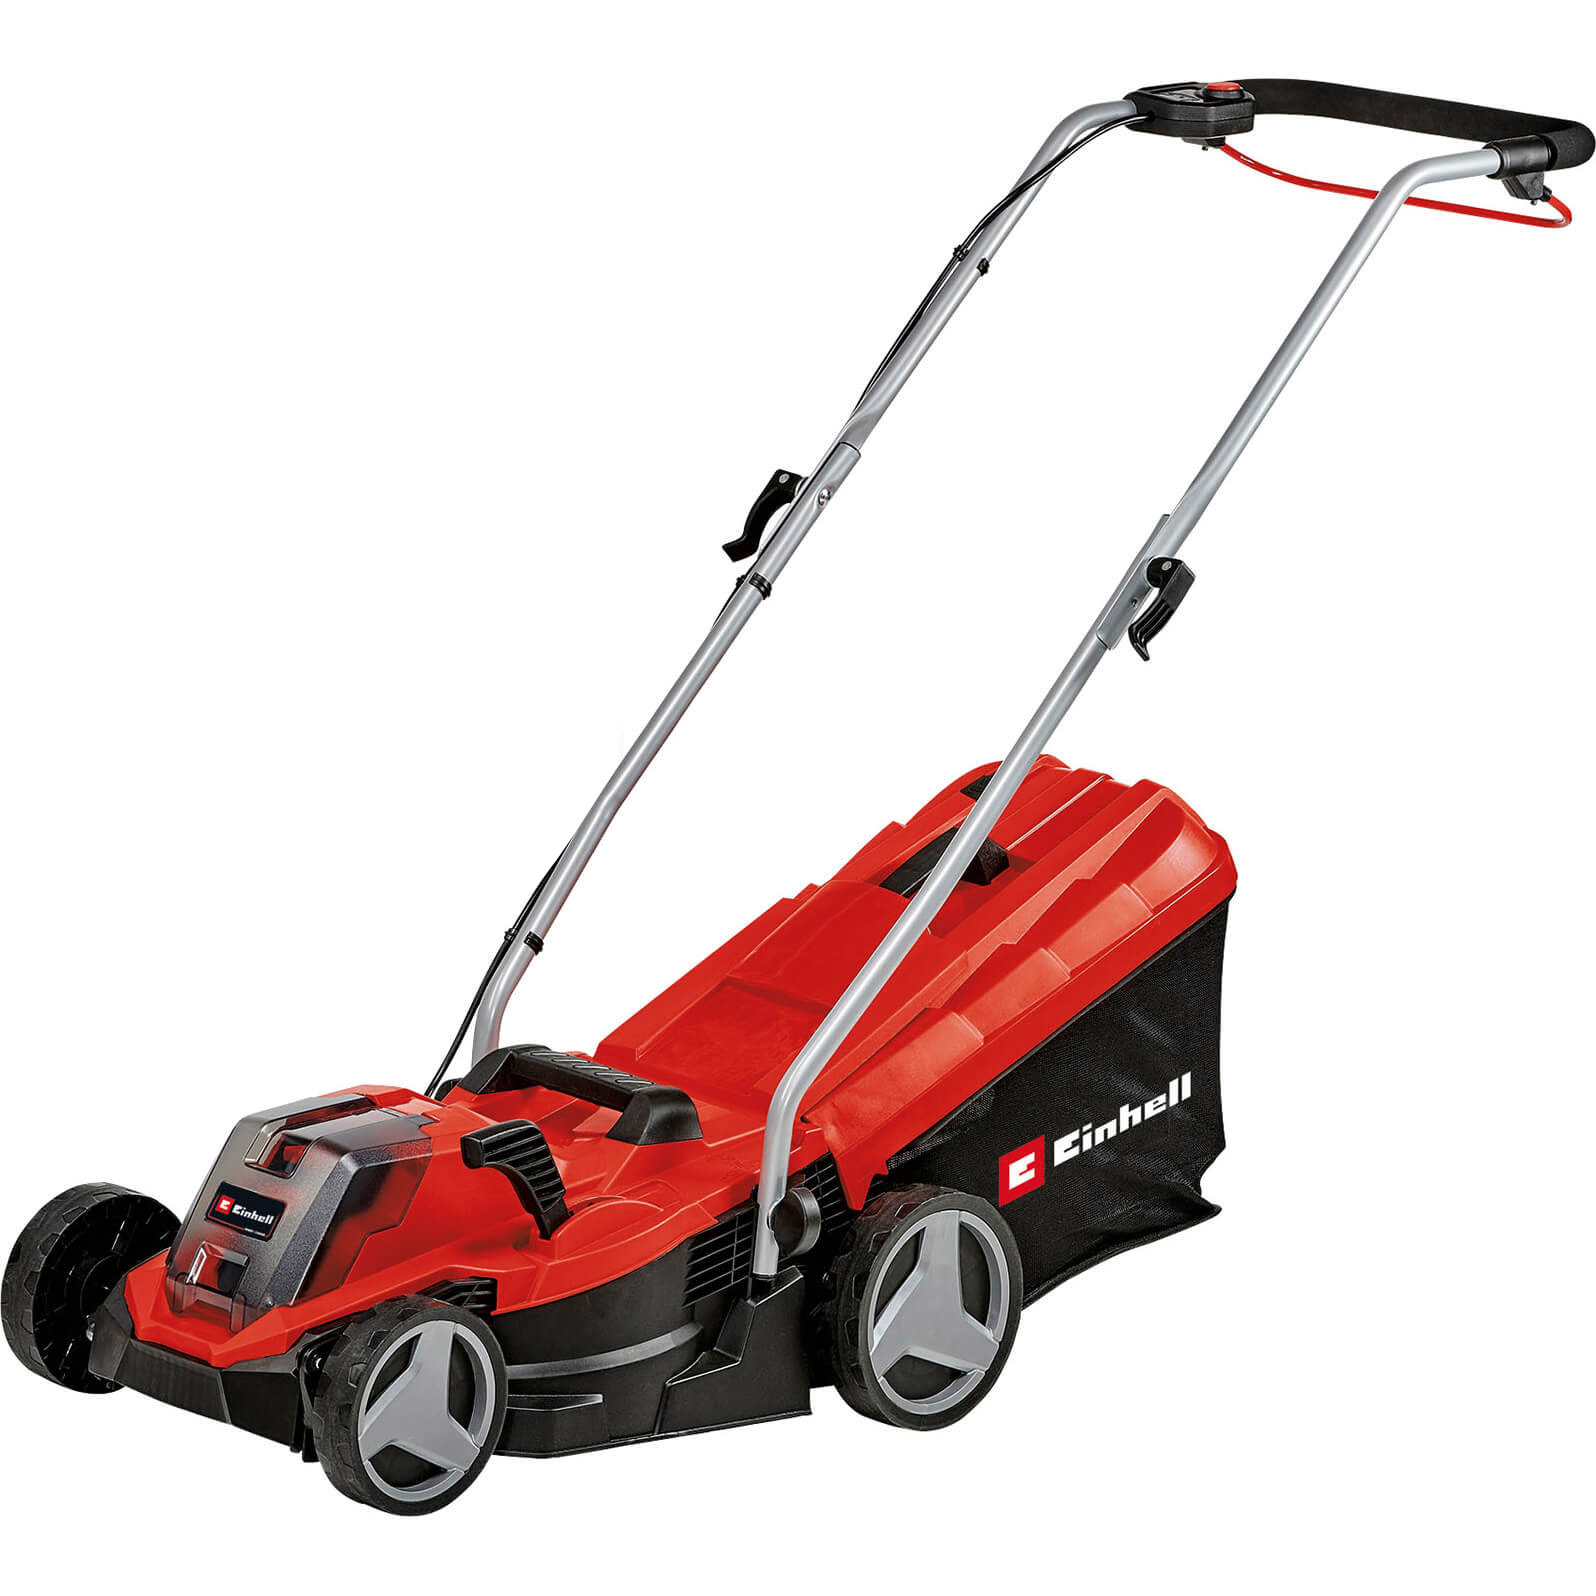 Image of Einhell GE-CM 18/33 Li 18v Cordless Brushless Lawnmower 330mm No Batteries No Charger